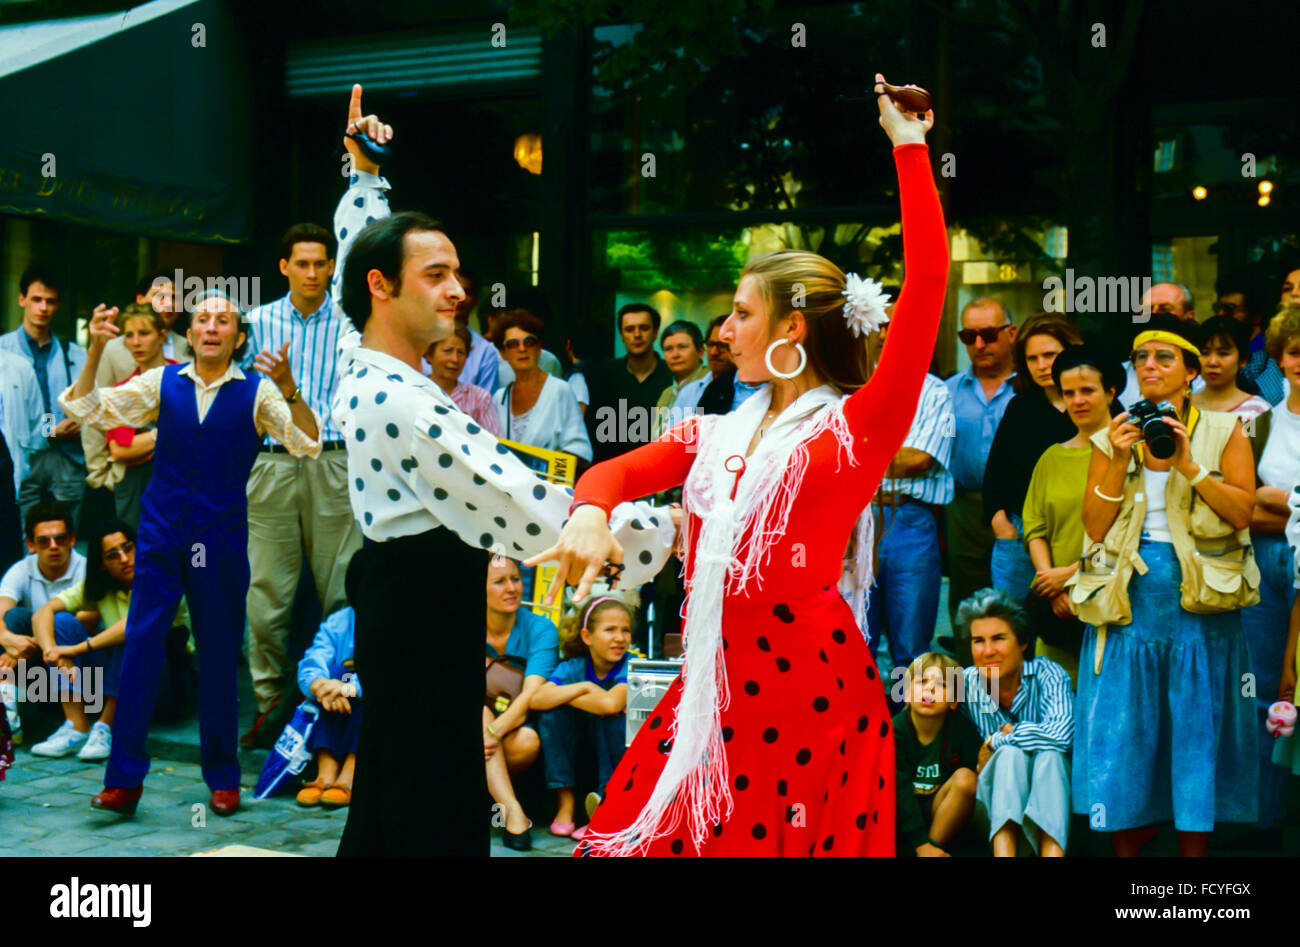 Paris, France, Spanish Couple Flamingo Dancing on Street in Costume, in front of Large crowd People Watching Show, audience Stock Photo